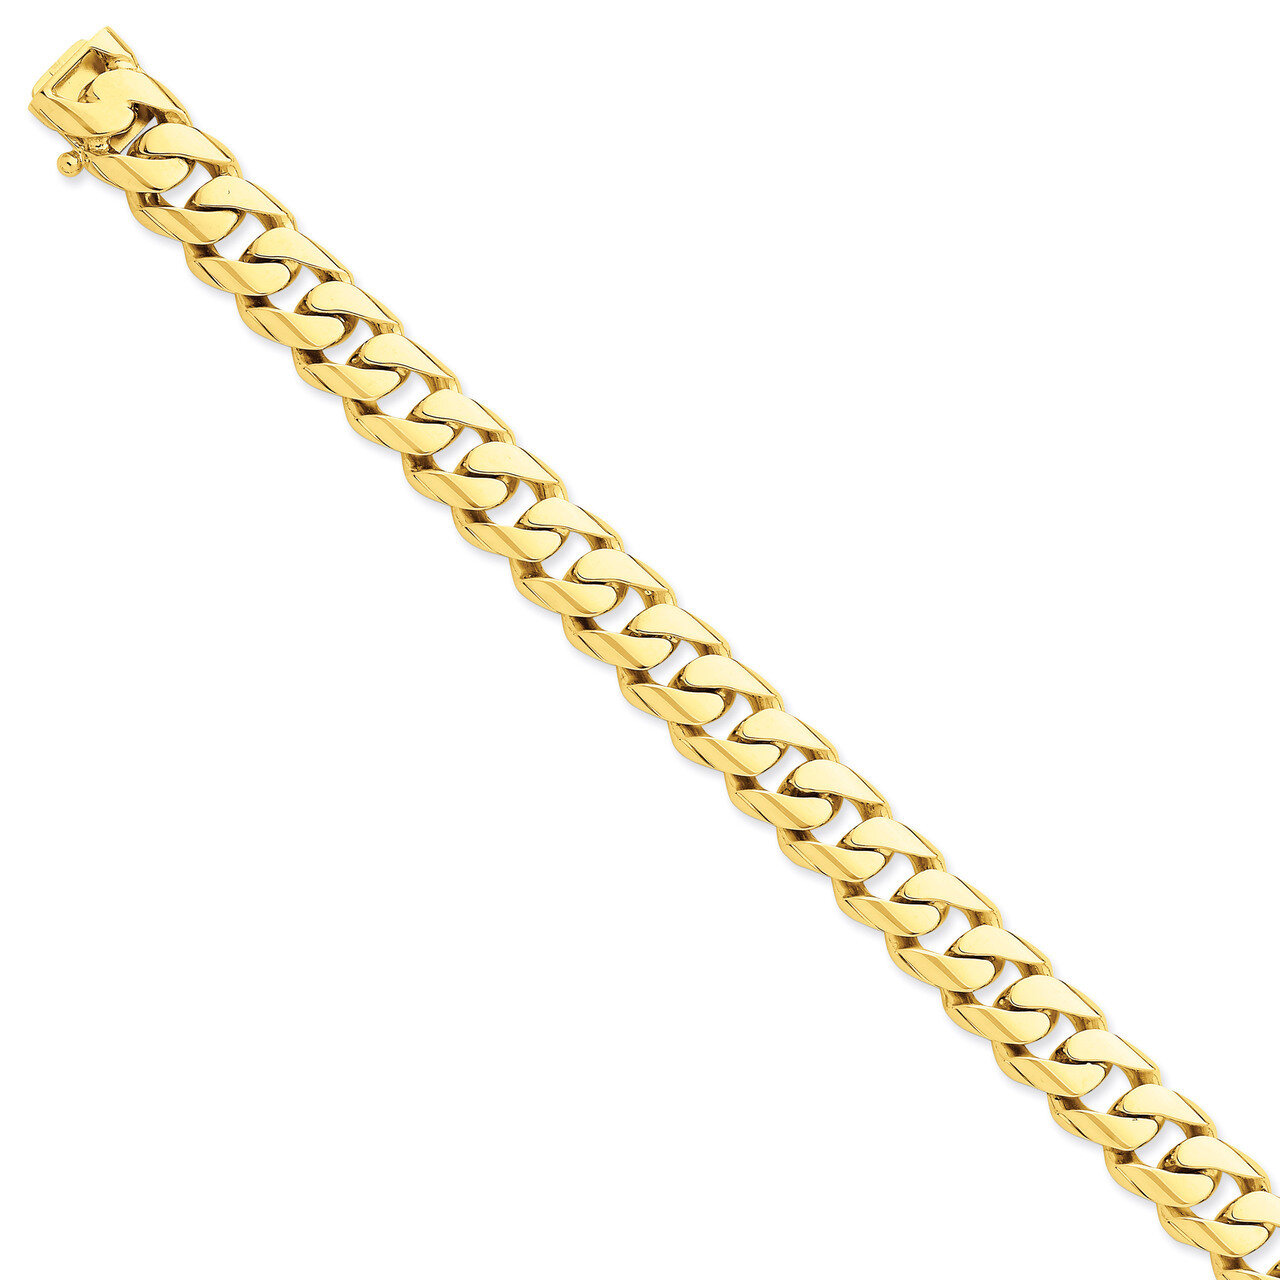 11mm Hand-polished Rounded Curb Chain 24 Inch 14k Gold LK127-24